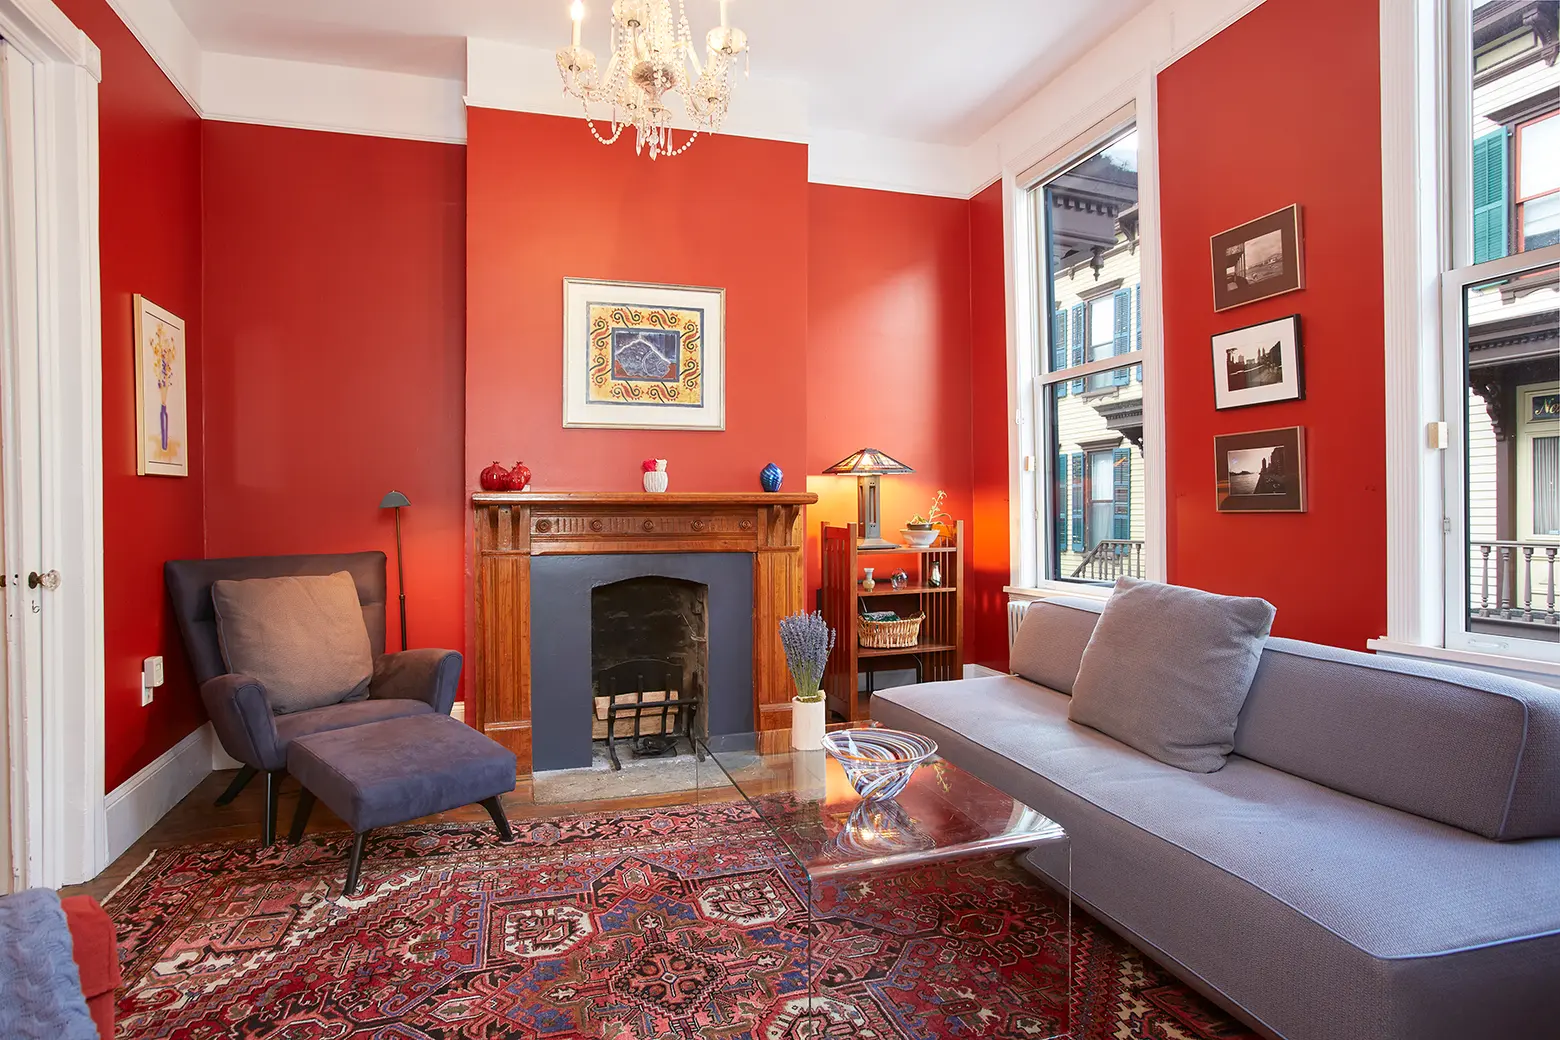 Step back in time in this charming row house on Washington Heights’ Sylvan Terrace, asking $1.5M